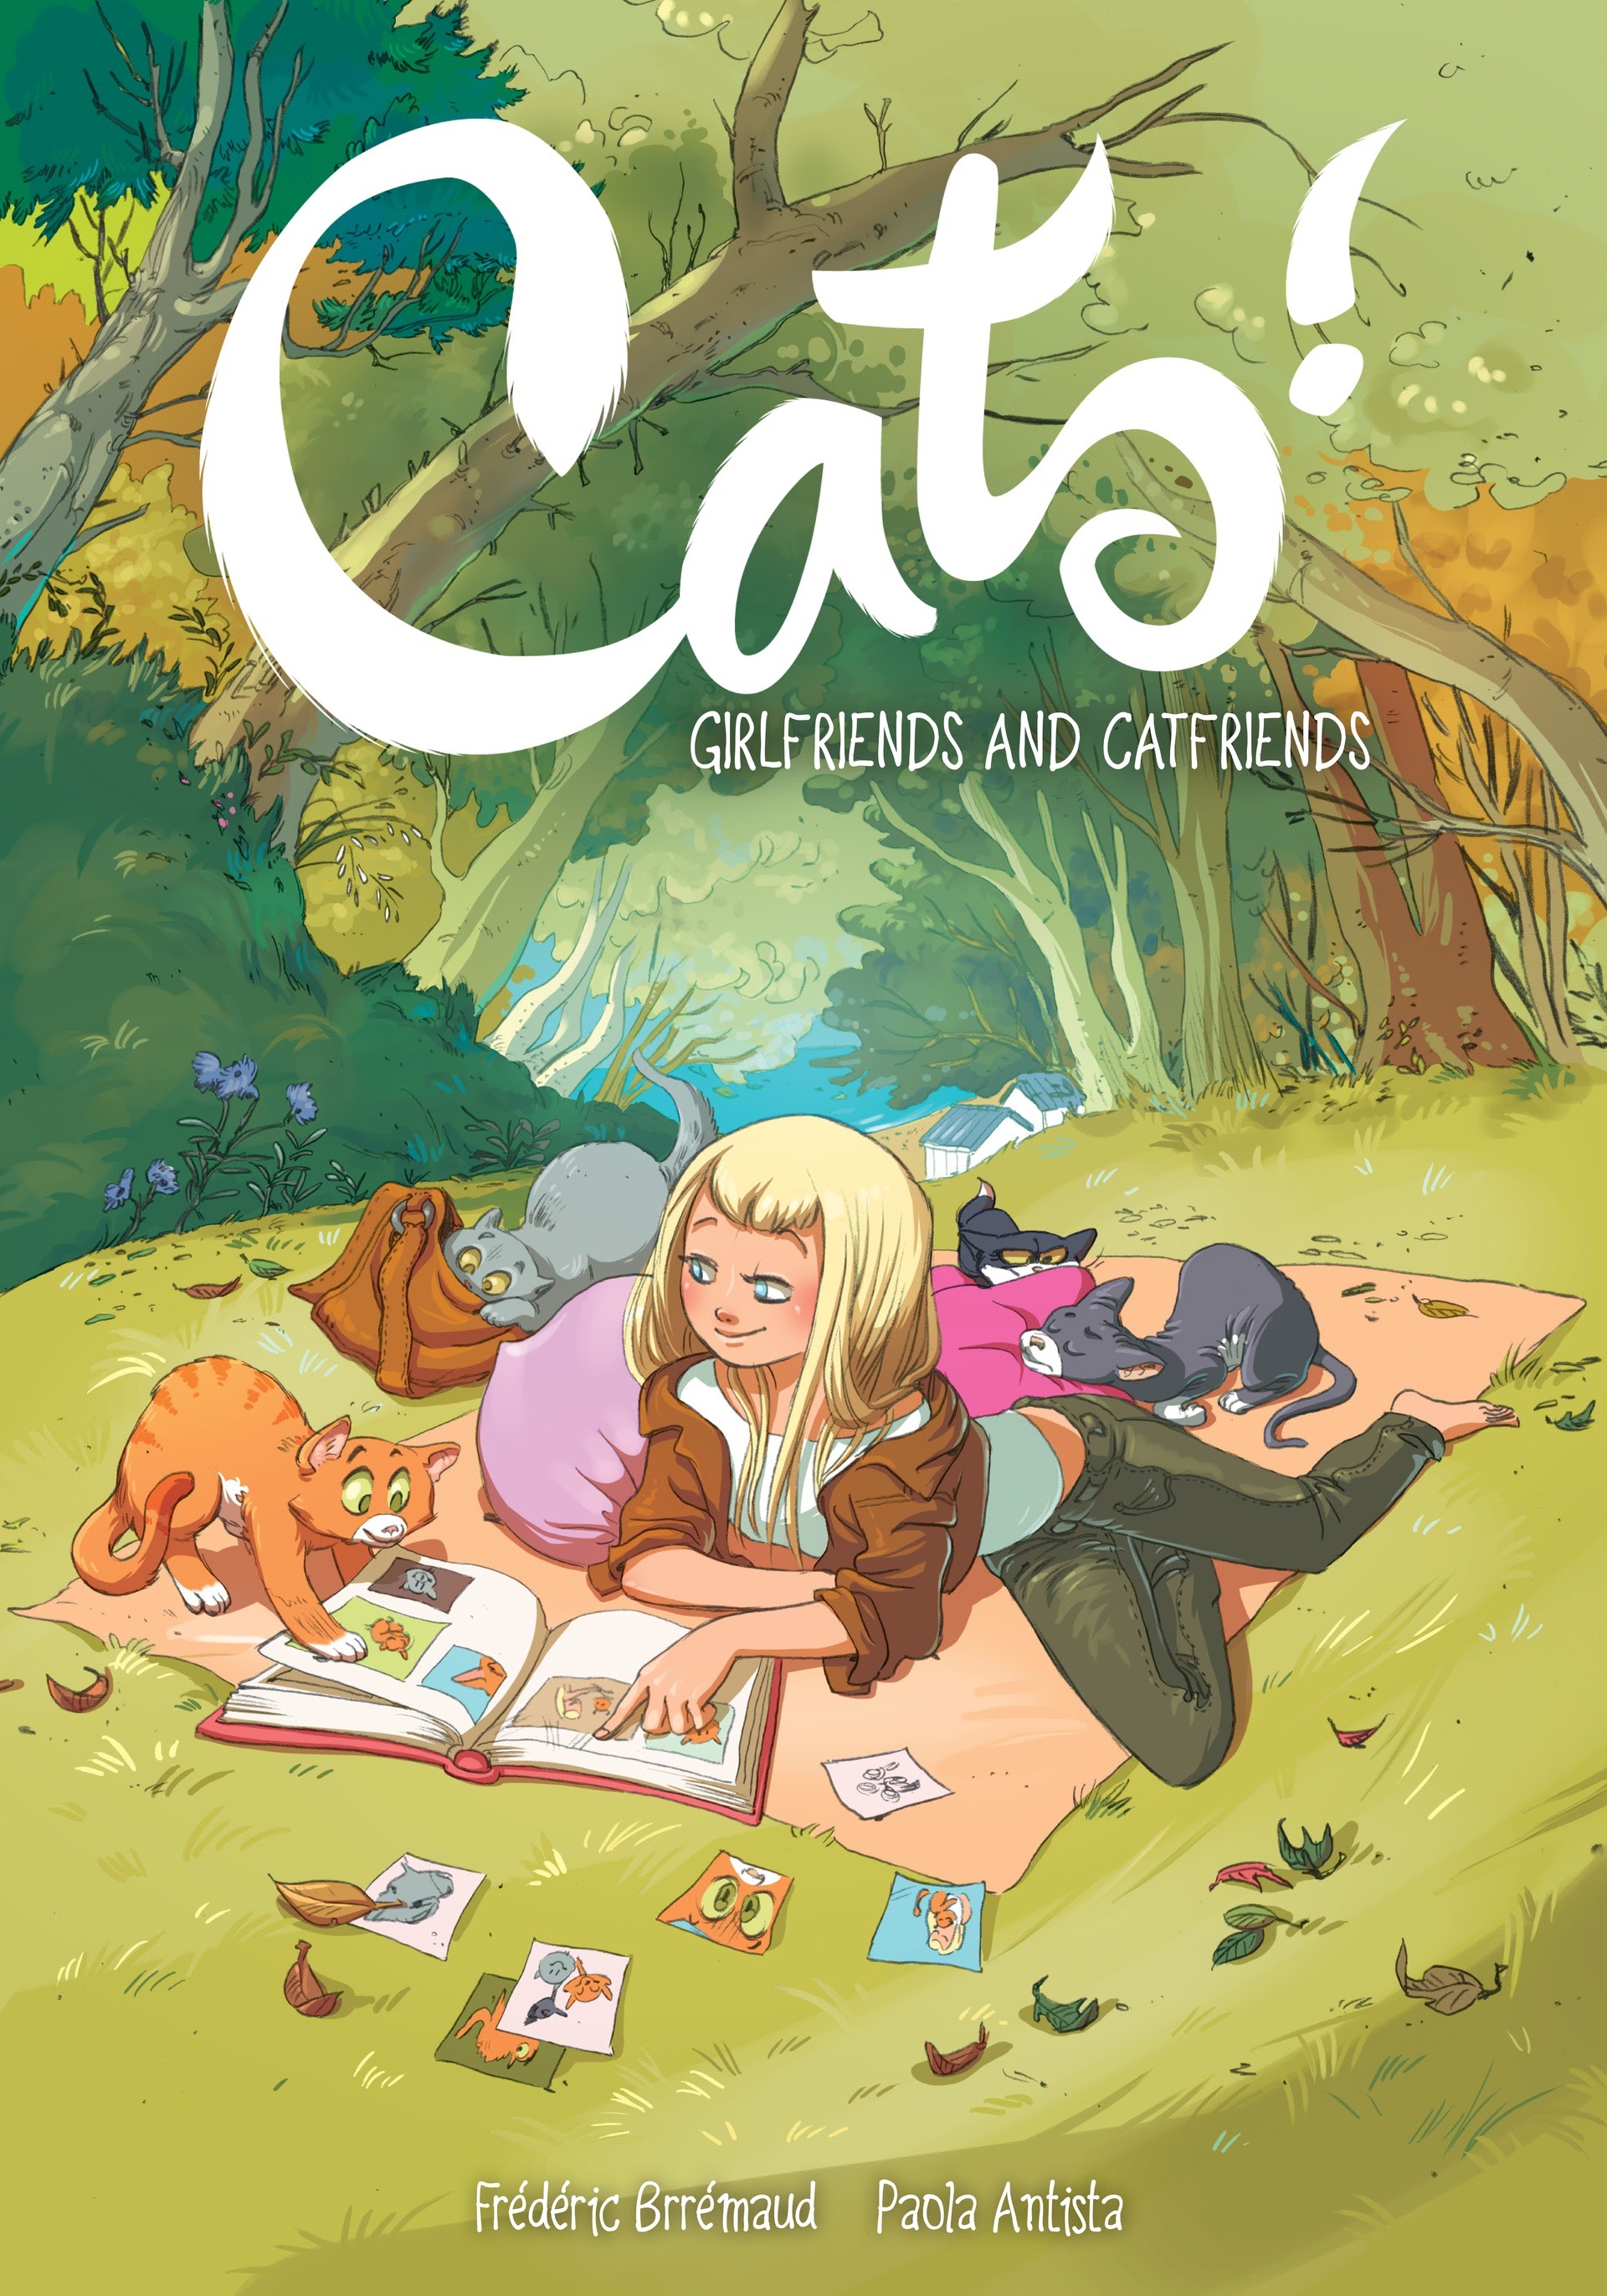 Read online Cats! Girlfriends and Catfriends comic -  Issue # TPB - 1